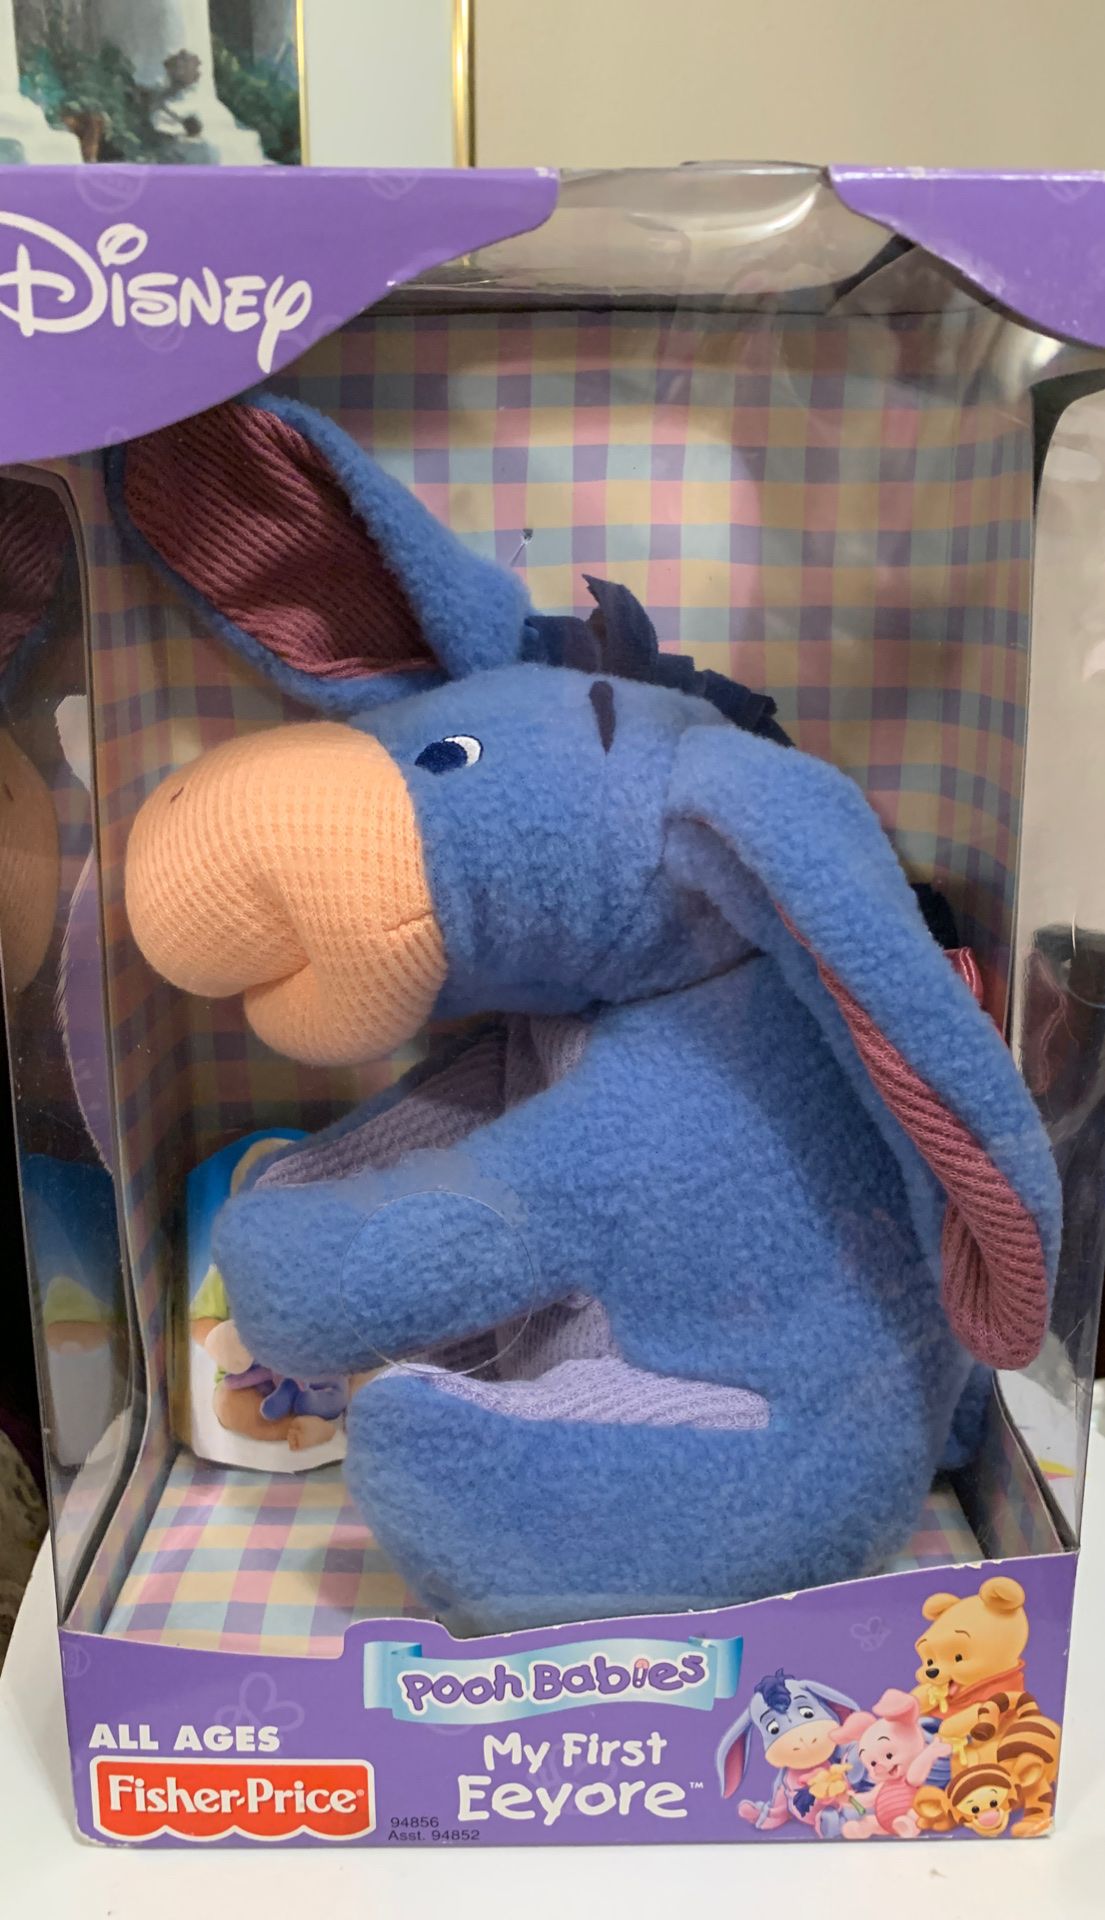 Disney Pooh Babies My First Eeyore ALL AGES FIsher Price